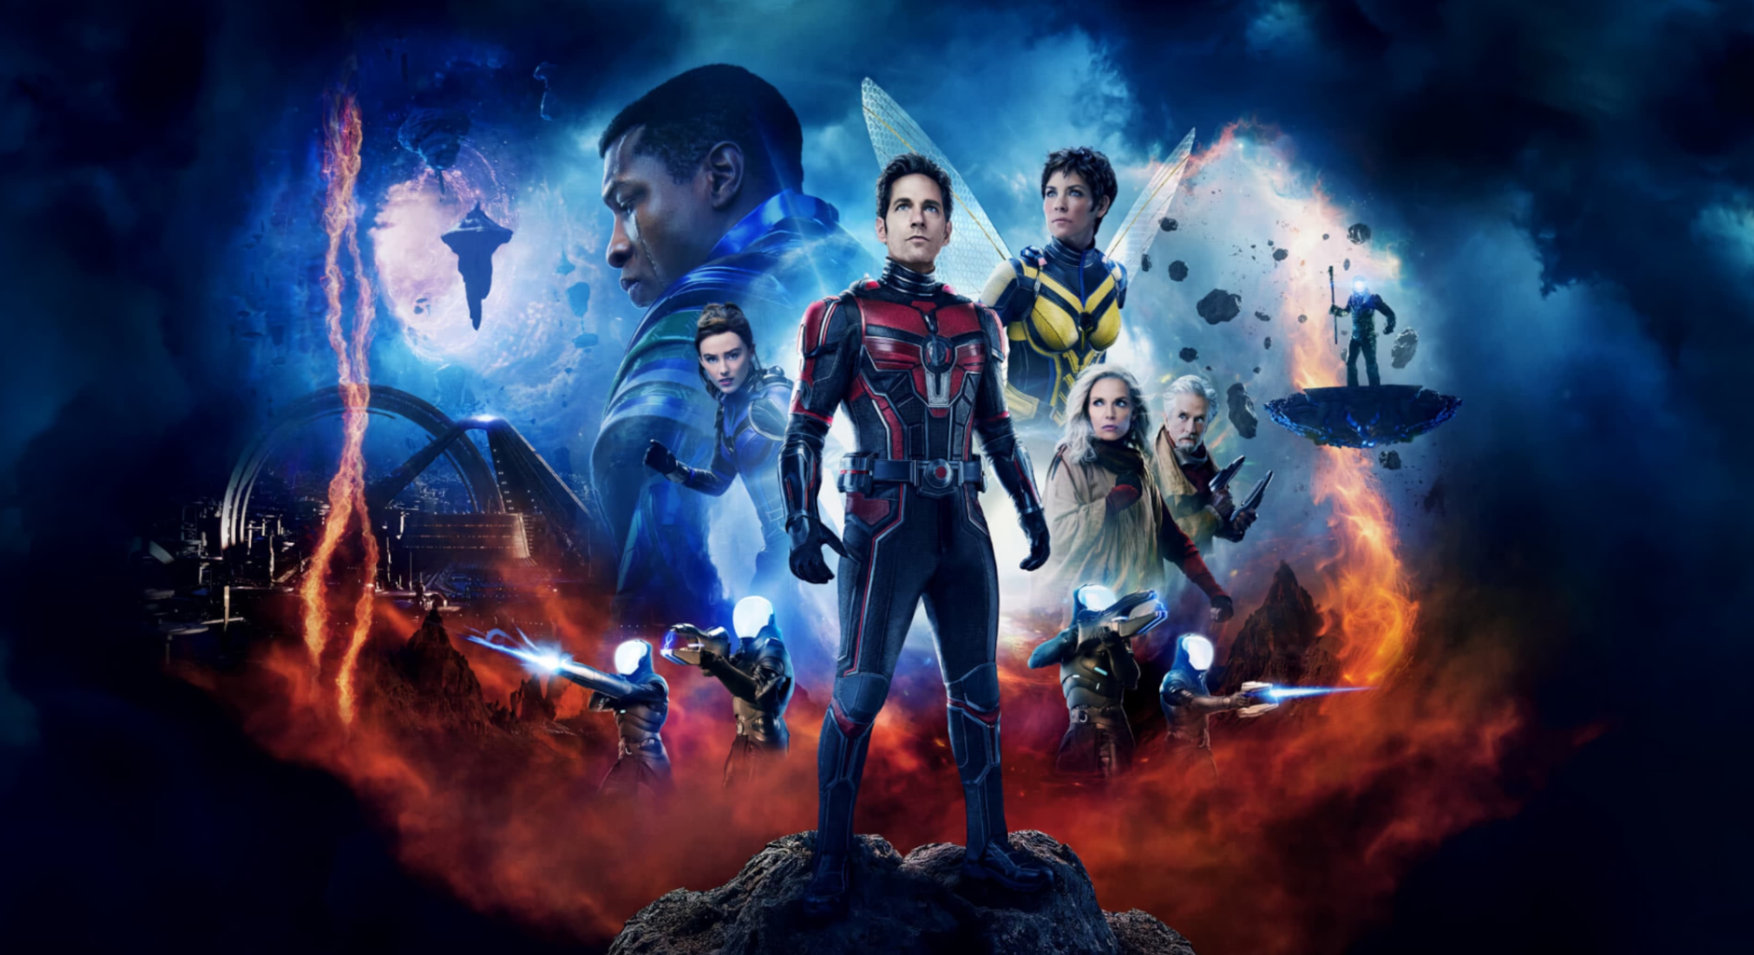 Ant-Man and the Wasp: Quantumania (2023) Full Movie Online - A Mind-Bending Adventure in the Marvel Cinematic Universe - Rley